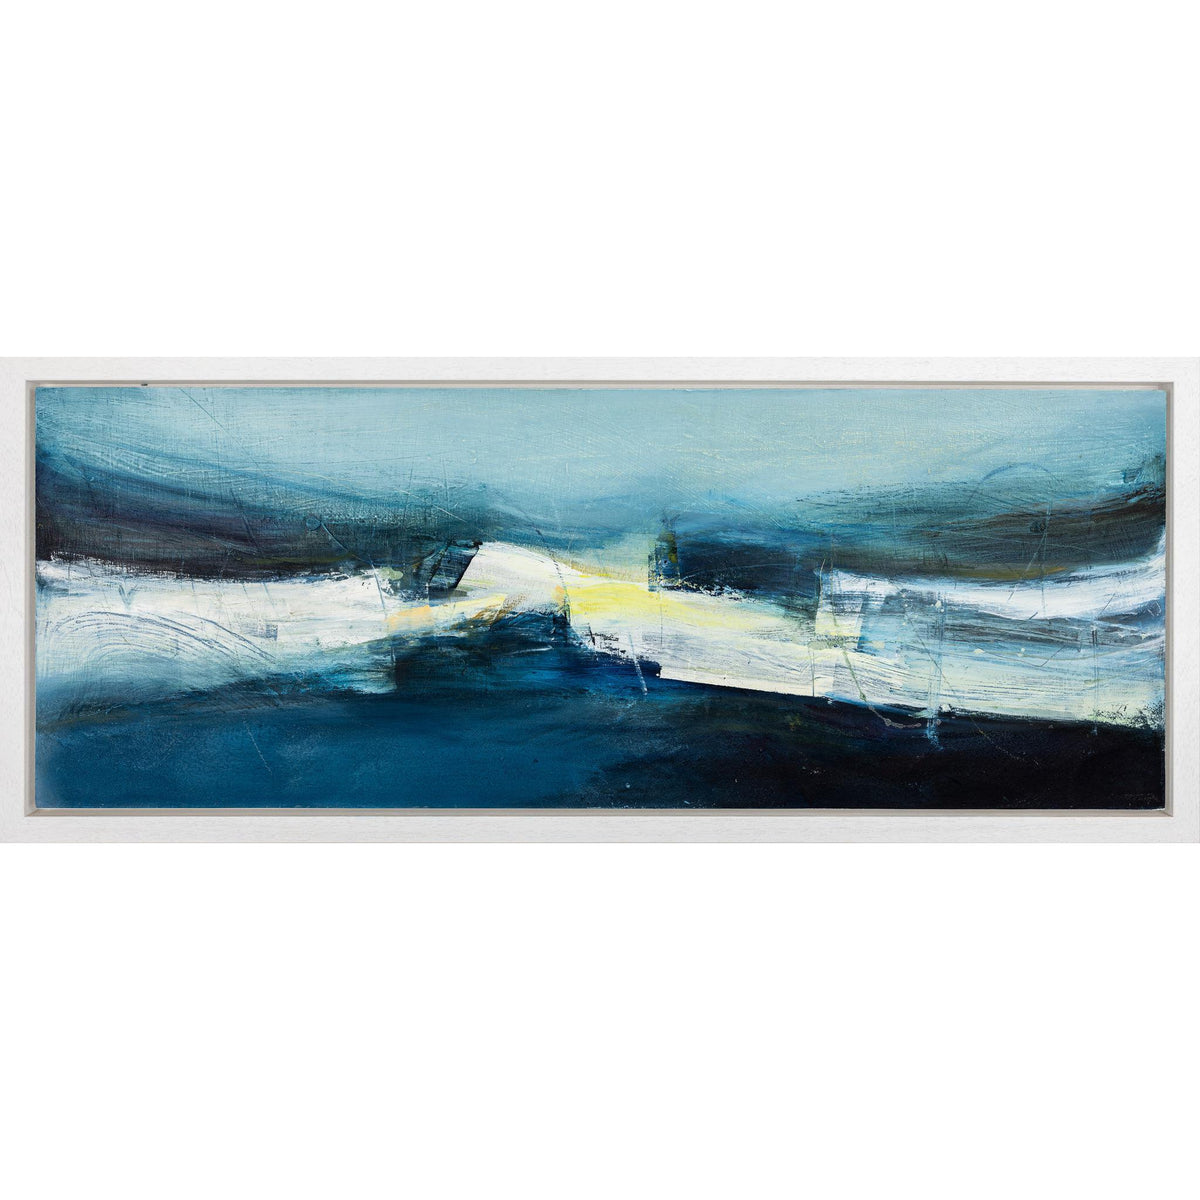 &#39;Undertow&#39; oil original by Justine Lois Thorpe, available at Padstow Gallery, Cornwall